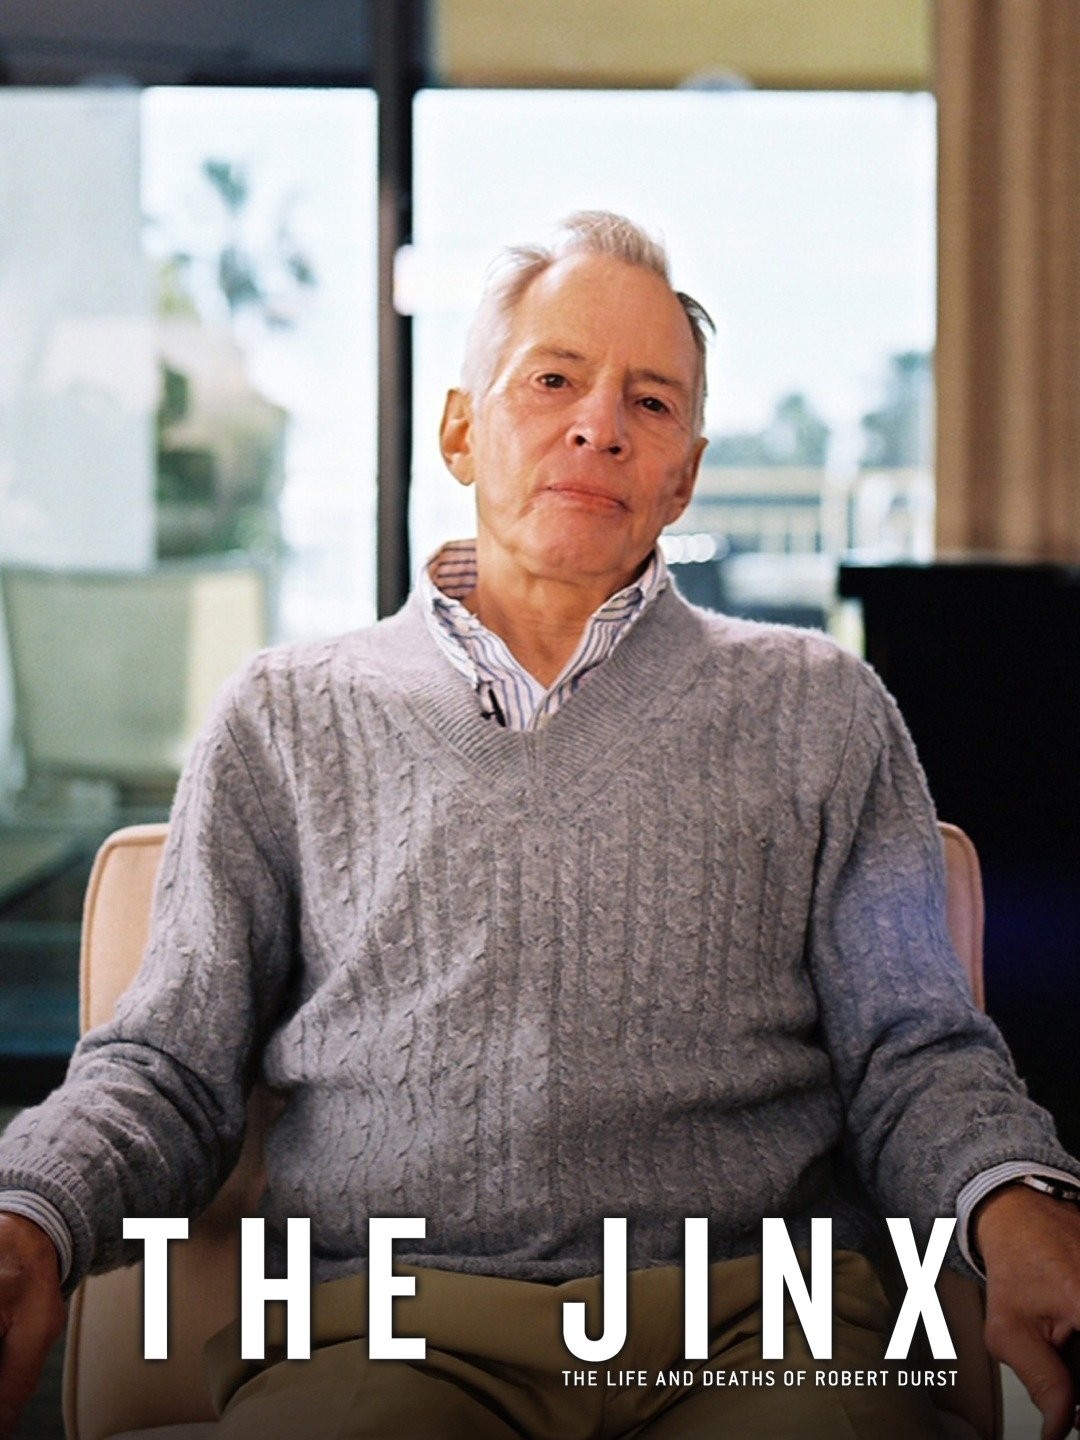 The Creepiest Things Robert Durst Says in His All Good Things DVD